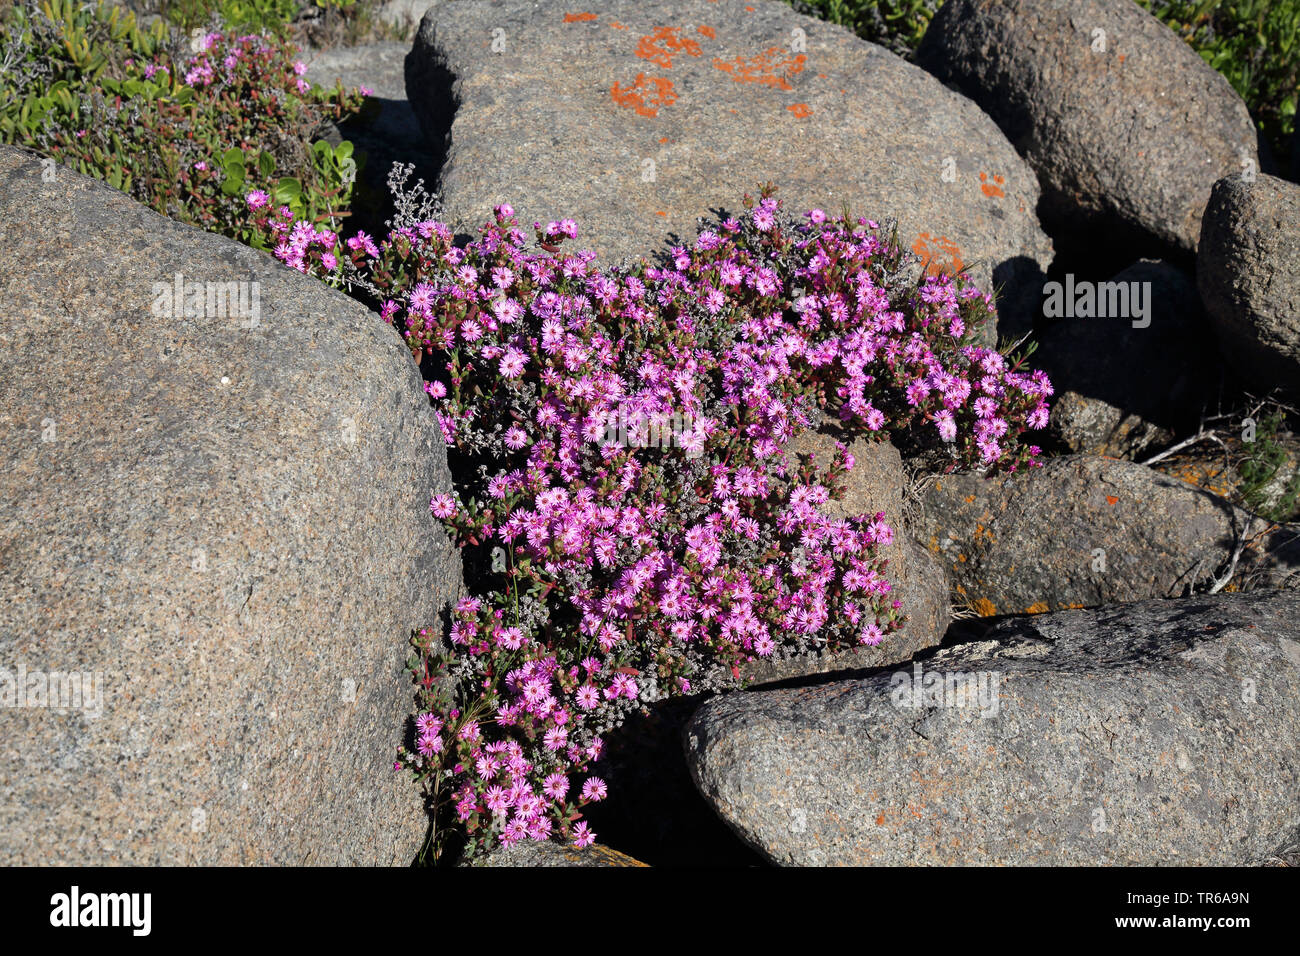 Common Dew Vygie, Hairy Dewflower, Roadside Dew Vygie, Purple Ice Plant, Rosea Ice Plant (Drosanthemum hispidum), blooming among rocks, South Africa, Western Cape, West Coast National Park Stock Photo